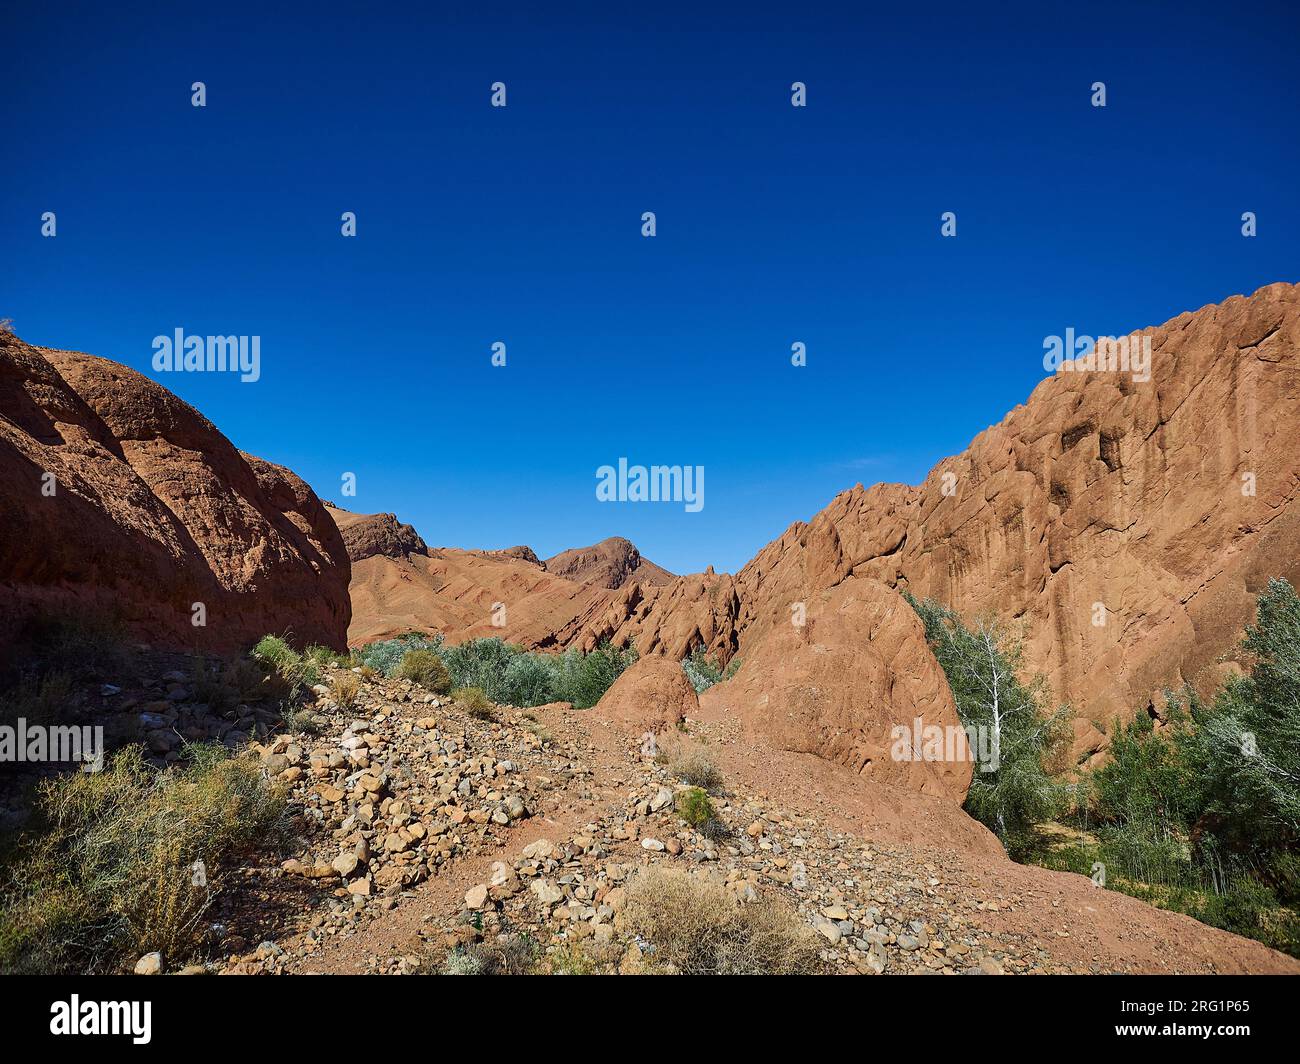 Oasis with lush and green vegetation in the dry and arid deserted region in a desert landscape in the mountains of Morocco. Stock Photo